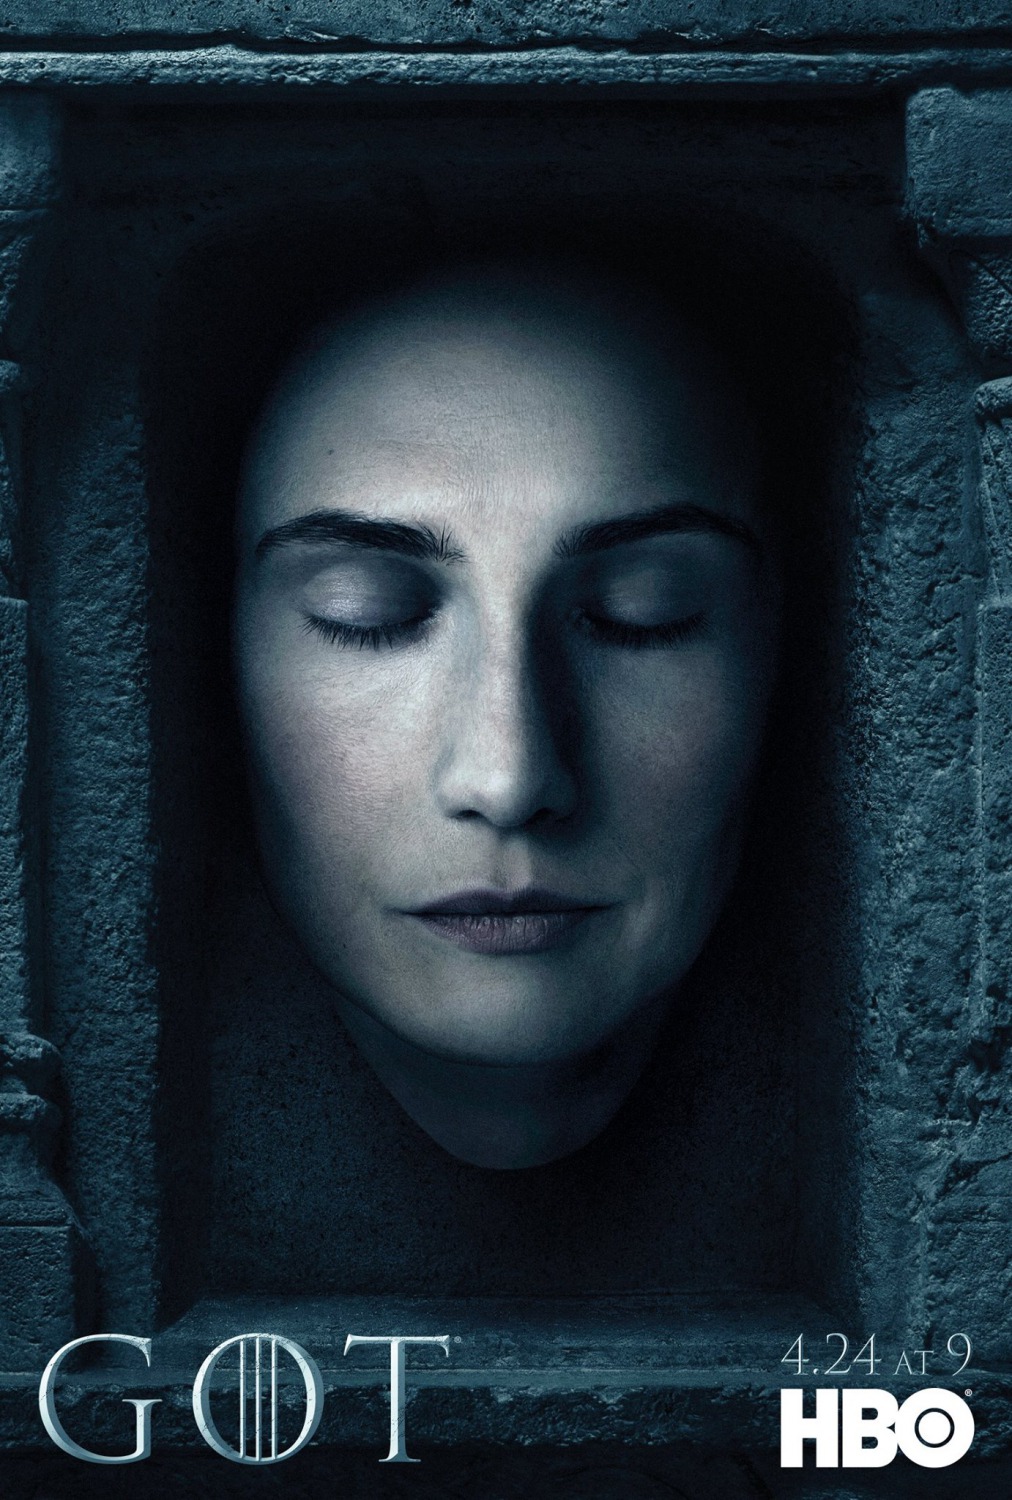 Extra Large TV Poster Image for Game of Thrones (#73 of 125)